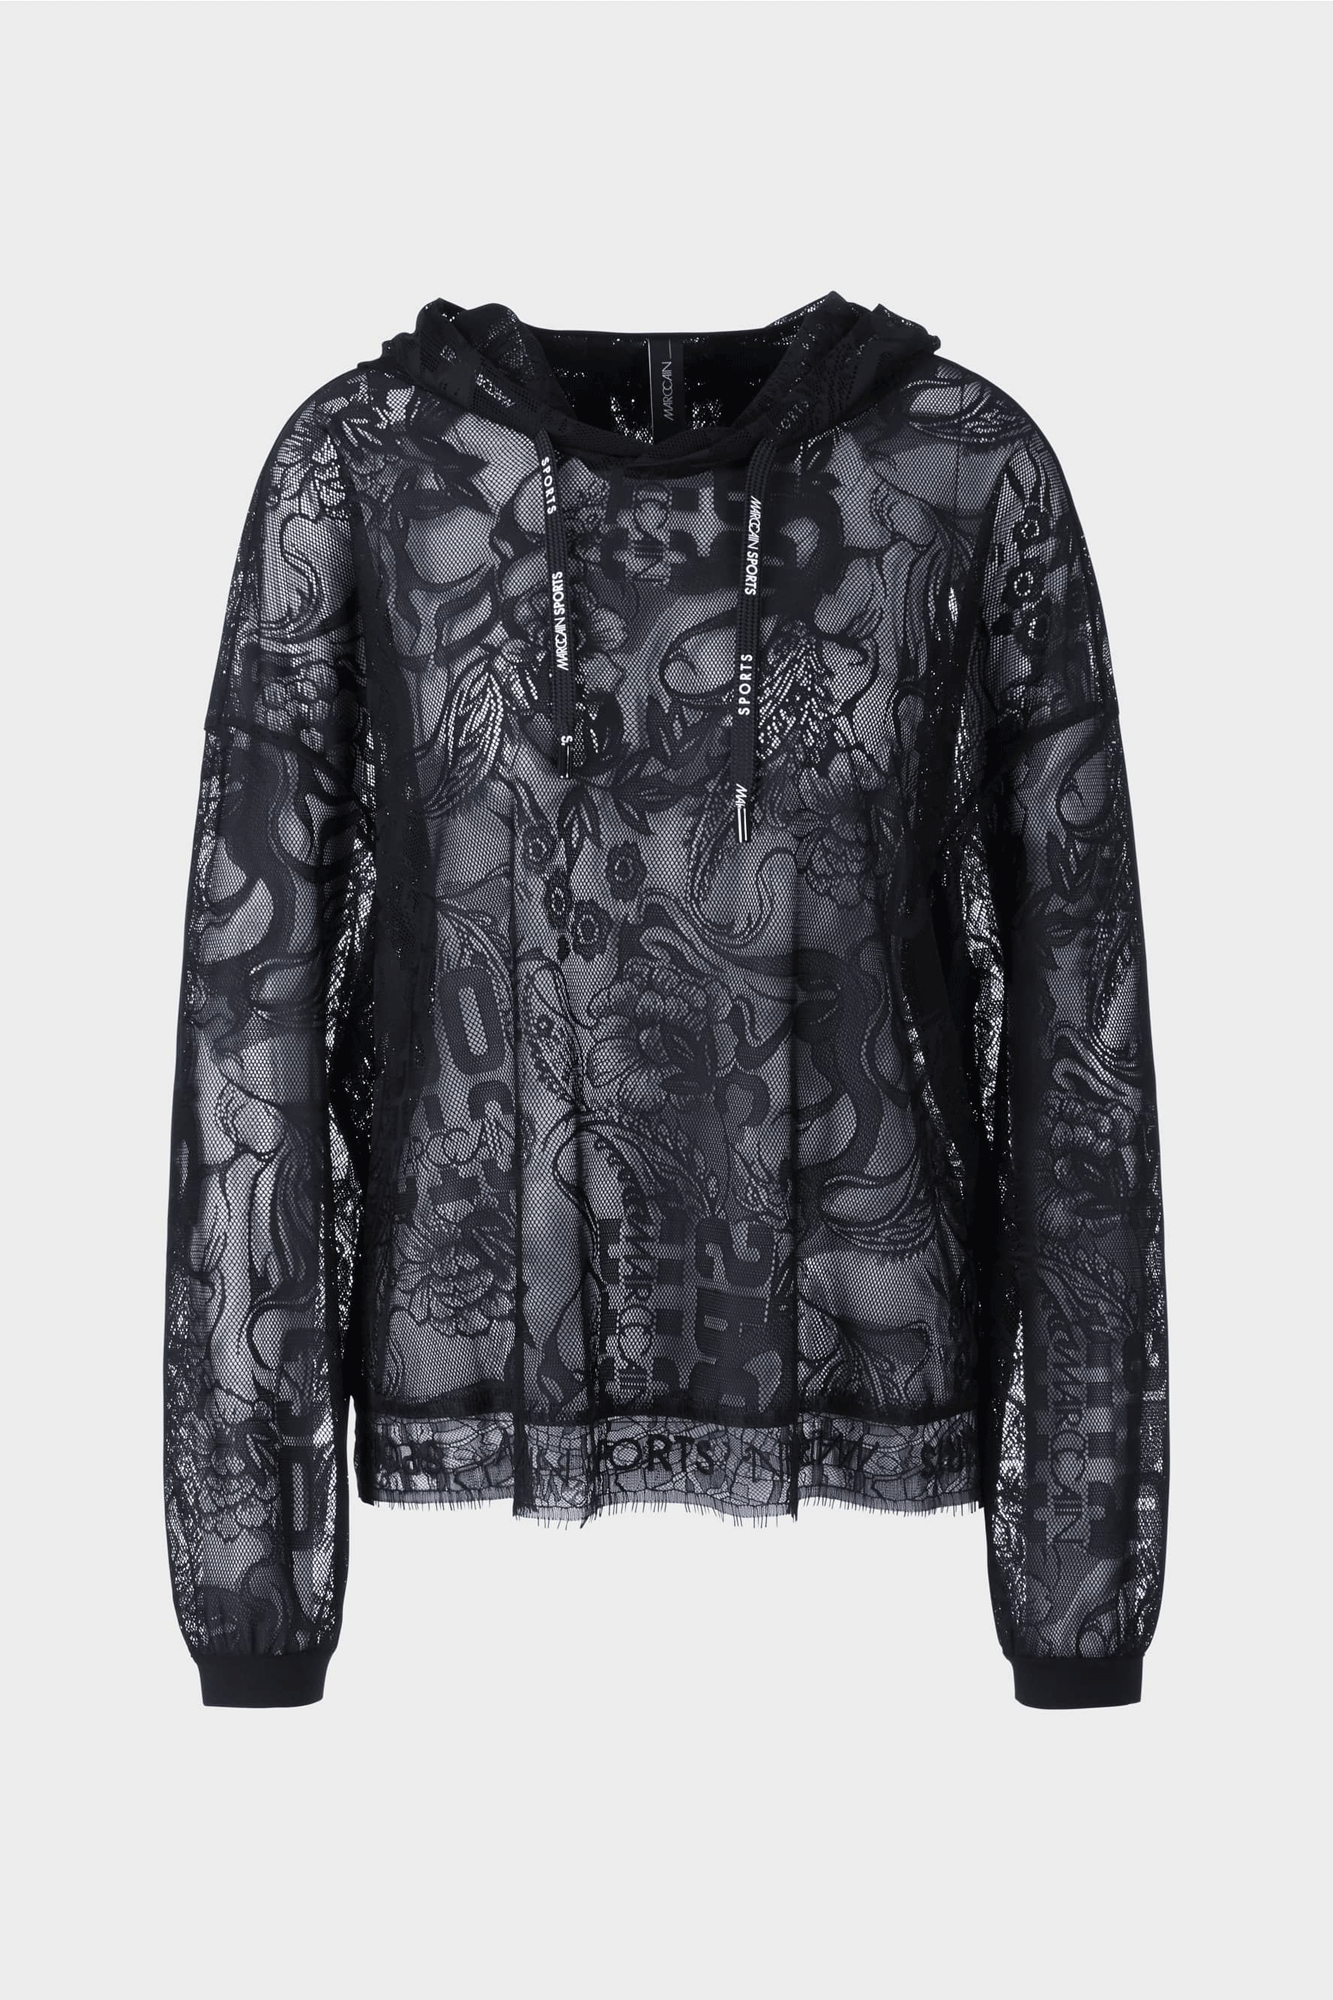 Crafted with premium tulle lace, this Lace Sweatshirt from Marc Cain features intricate motif inspired by mystical tattoos. The hem is graced with a delicate lace border and the signature Marc Cain lettering, while the sleeves are fastened with a ribbed cuff for a secure fit. Perfect for a fashionable and sophisticated look.